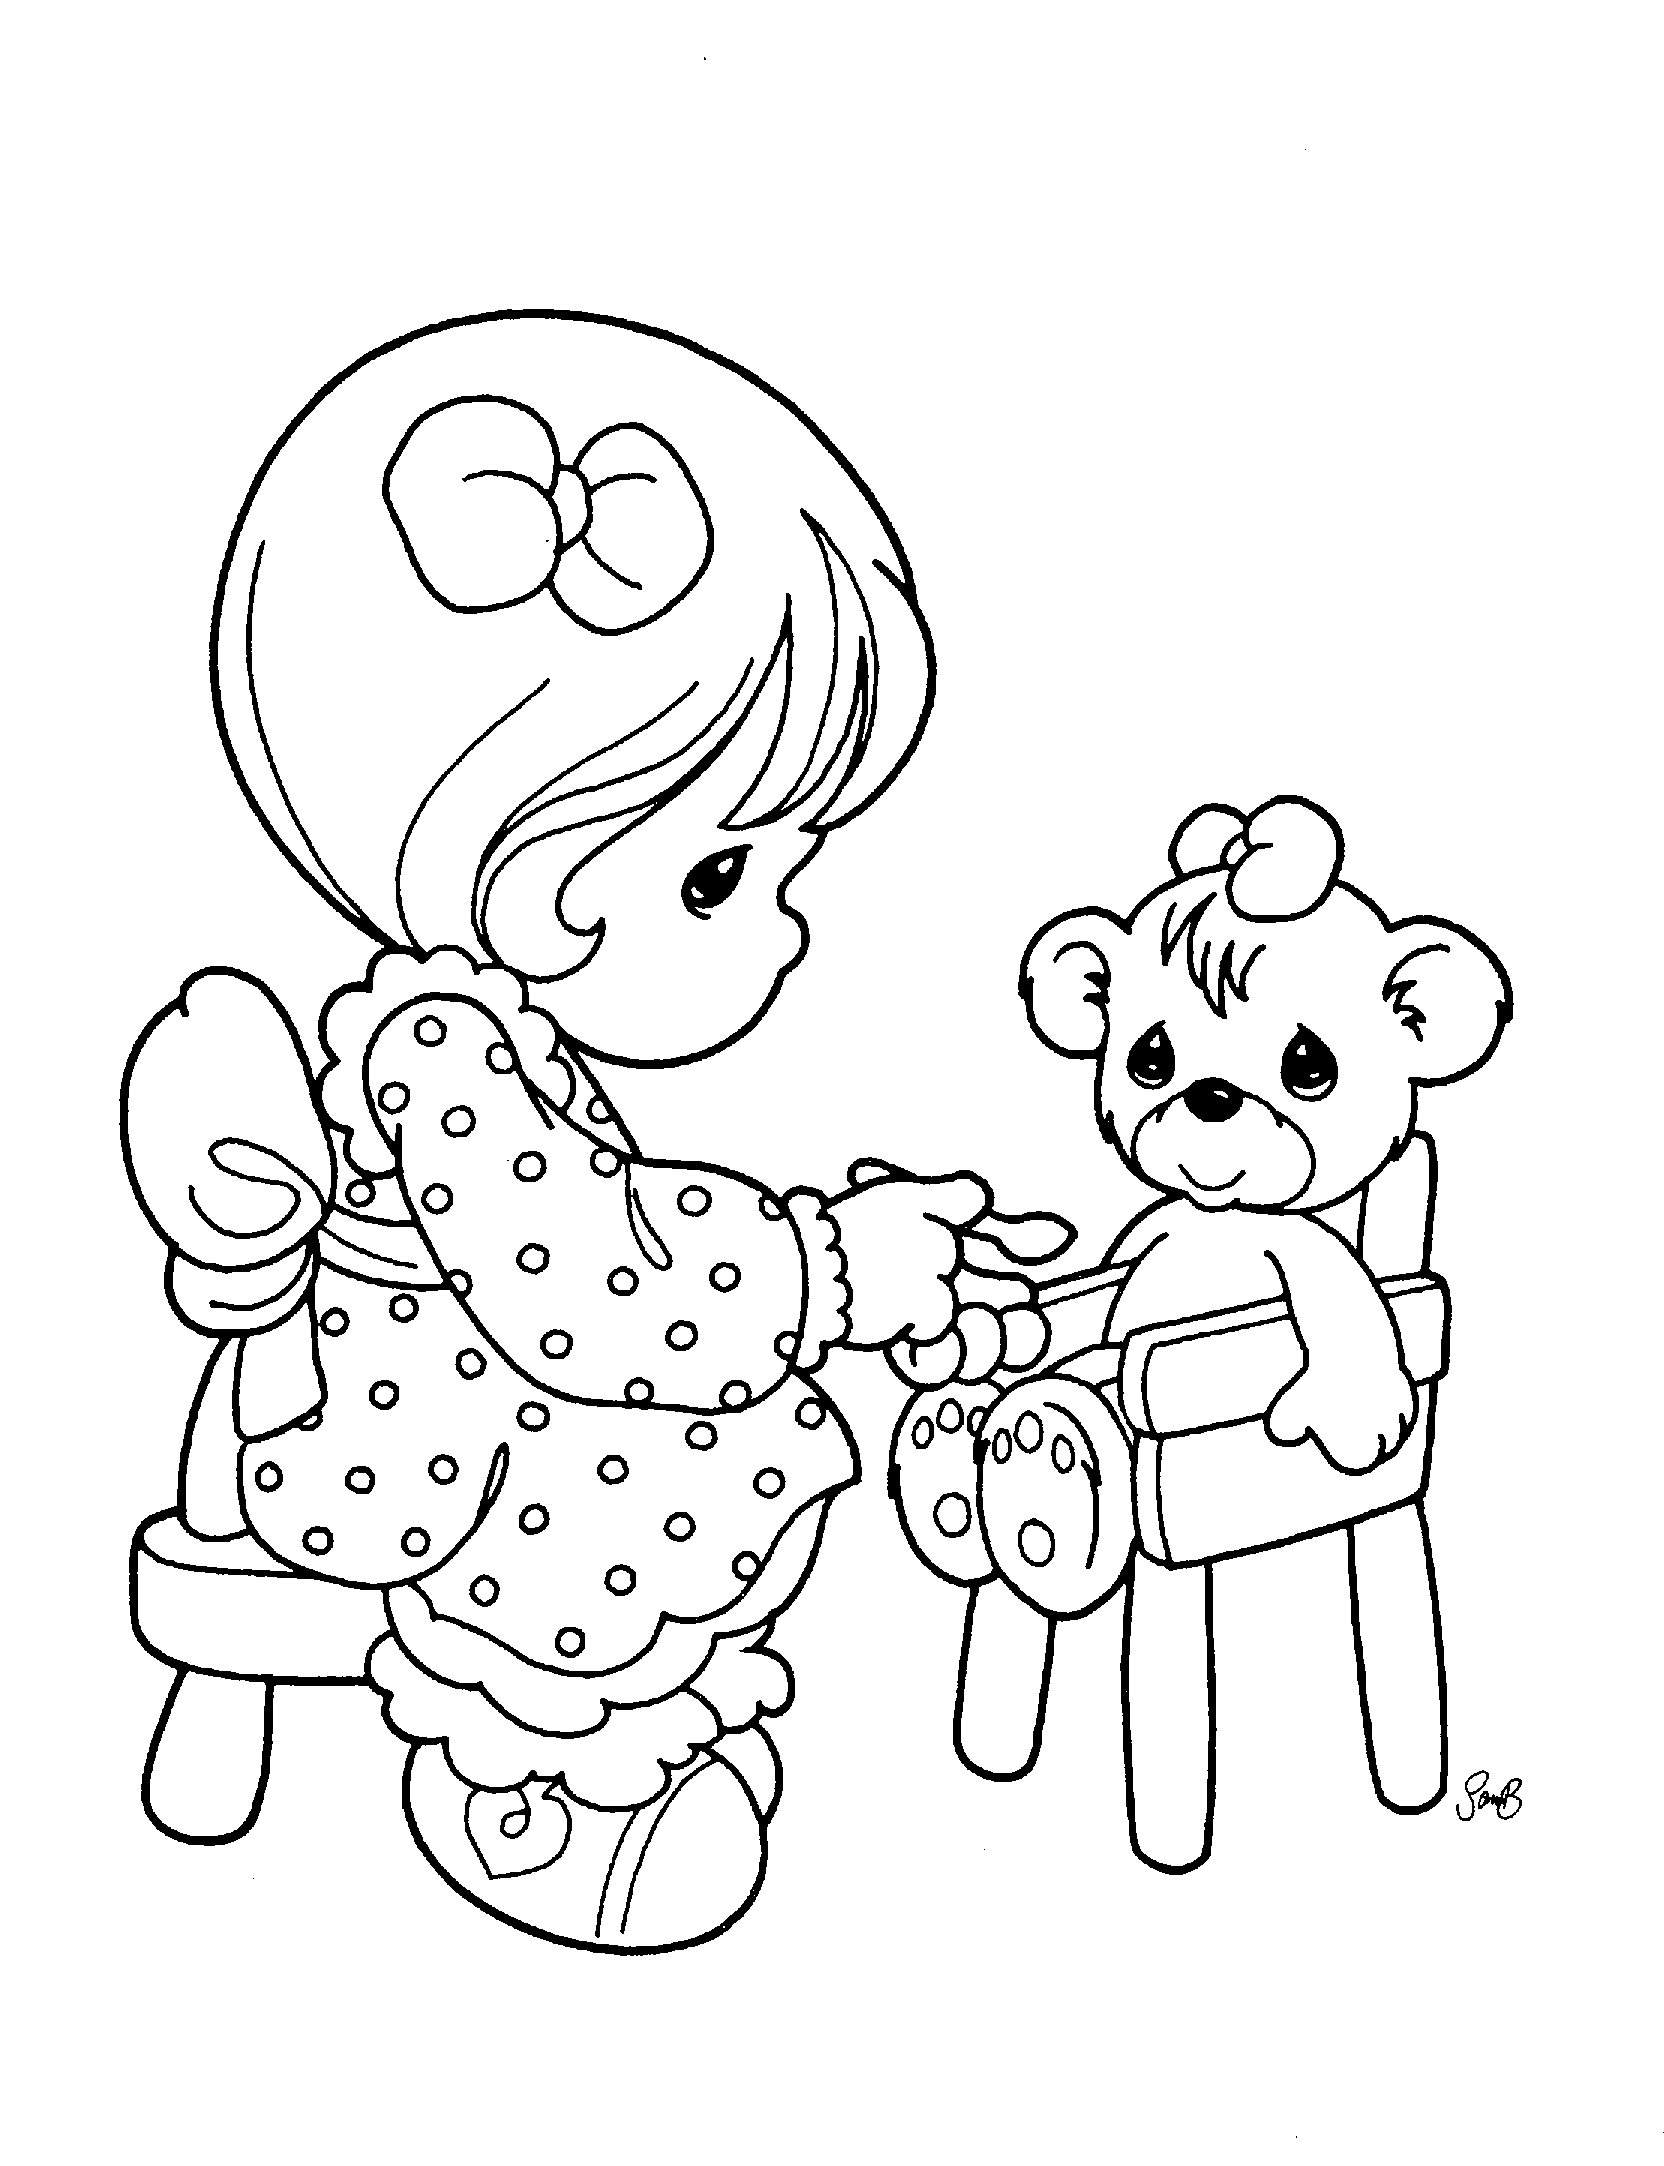 Precious Moments Baby Coloring Pages Free Printable Precious Moments Coloring Pages For Kids